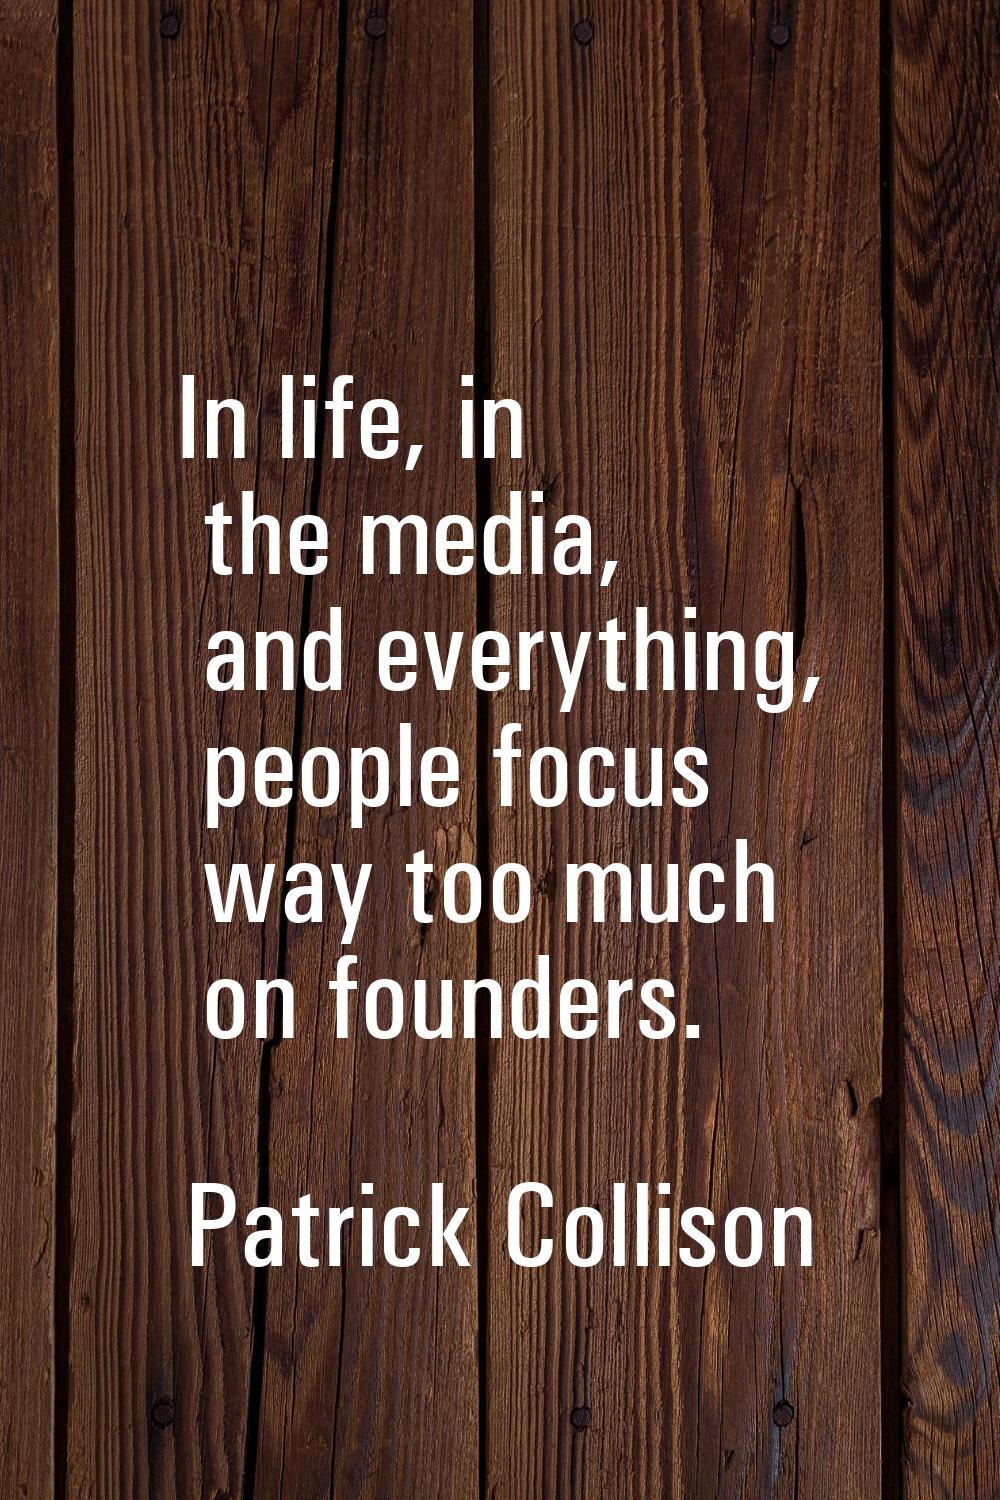 In life, in the media, and everything, people focus way too much on founders.